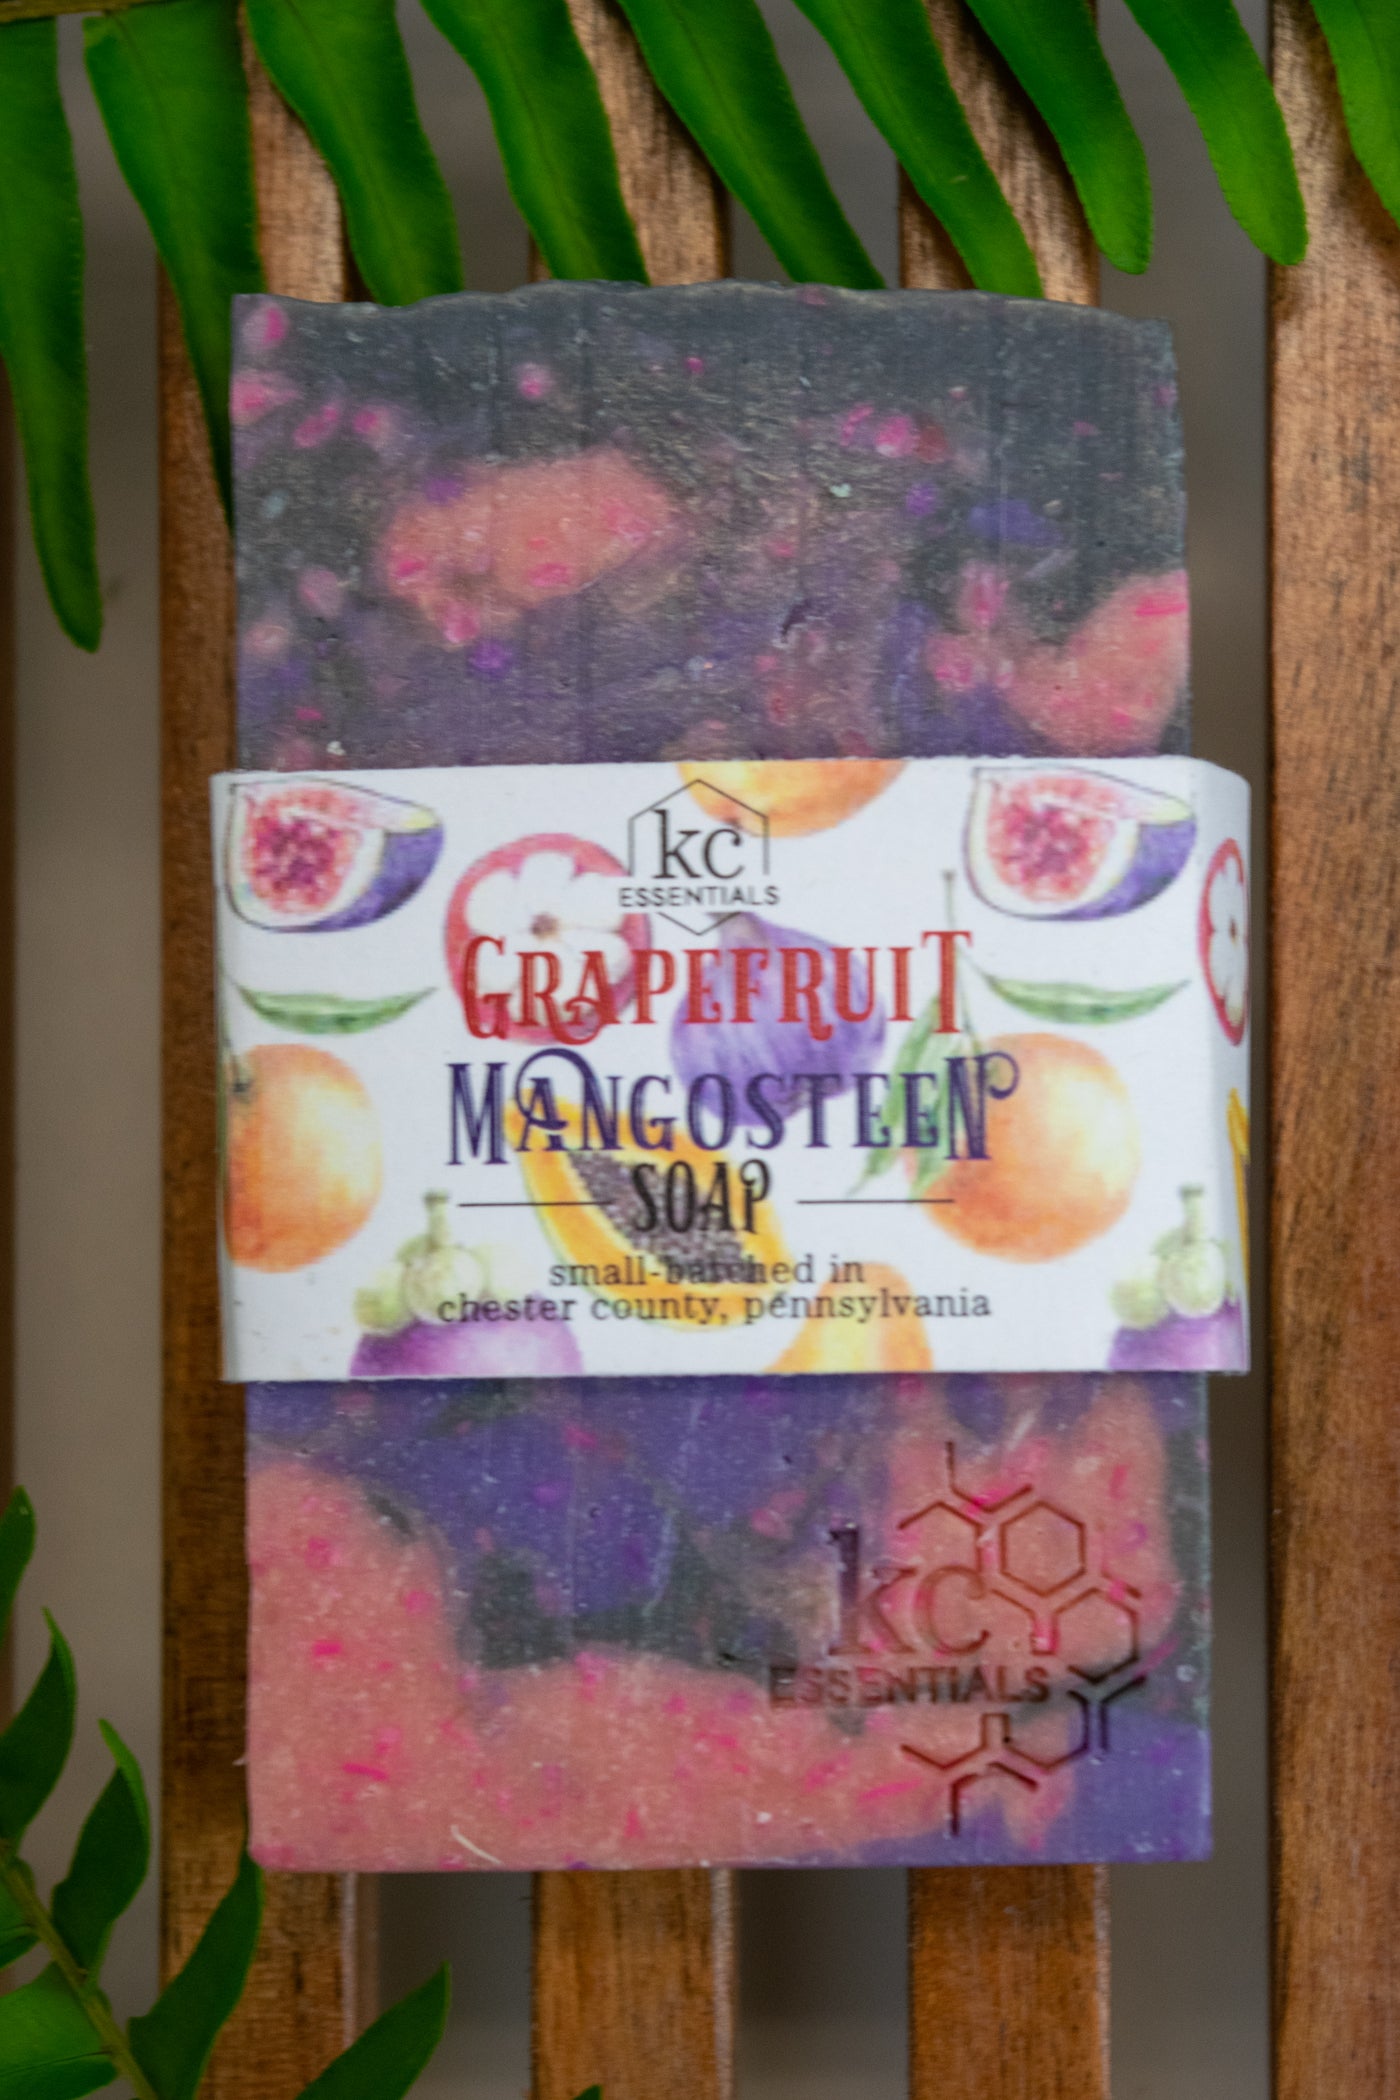 A meddly of colors in pink, purple and blue create the artisanal bar soap.